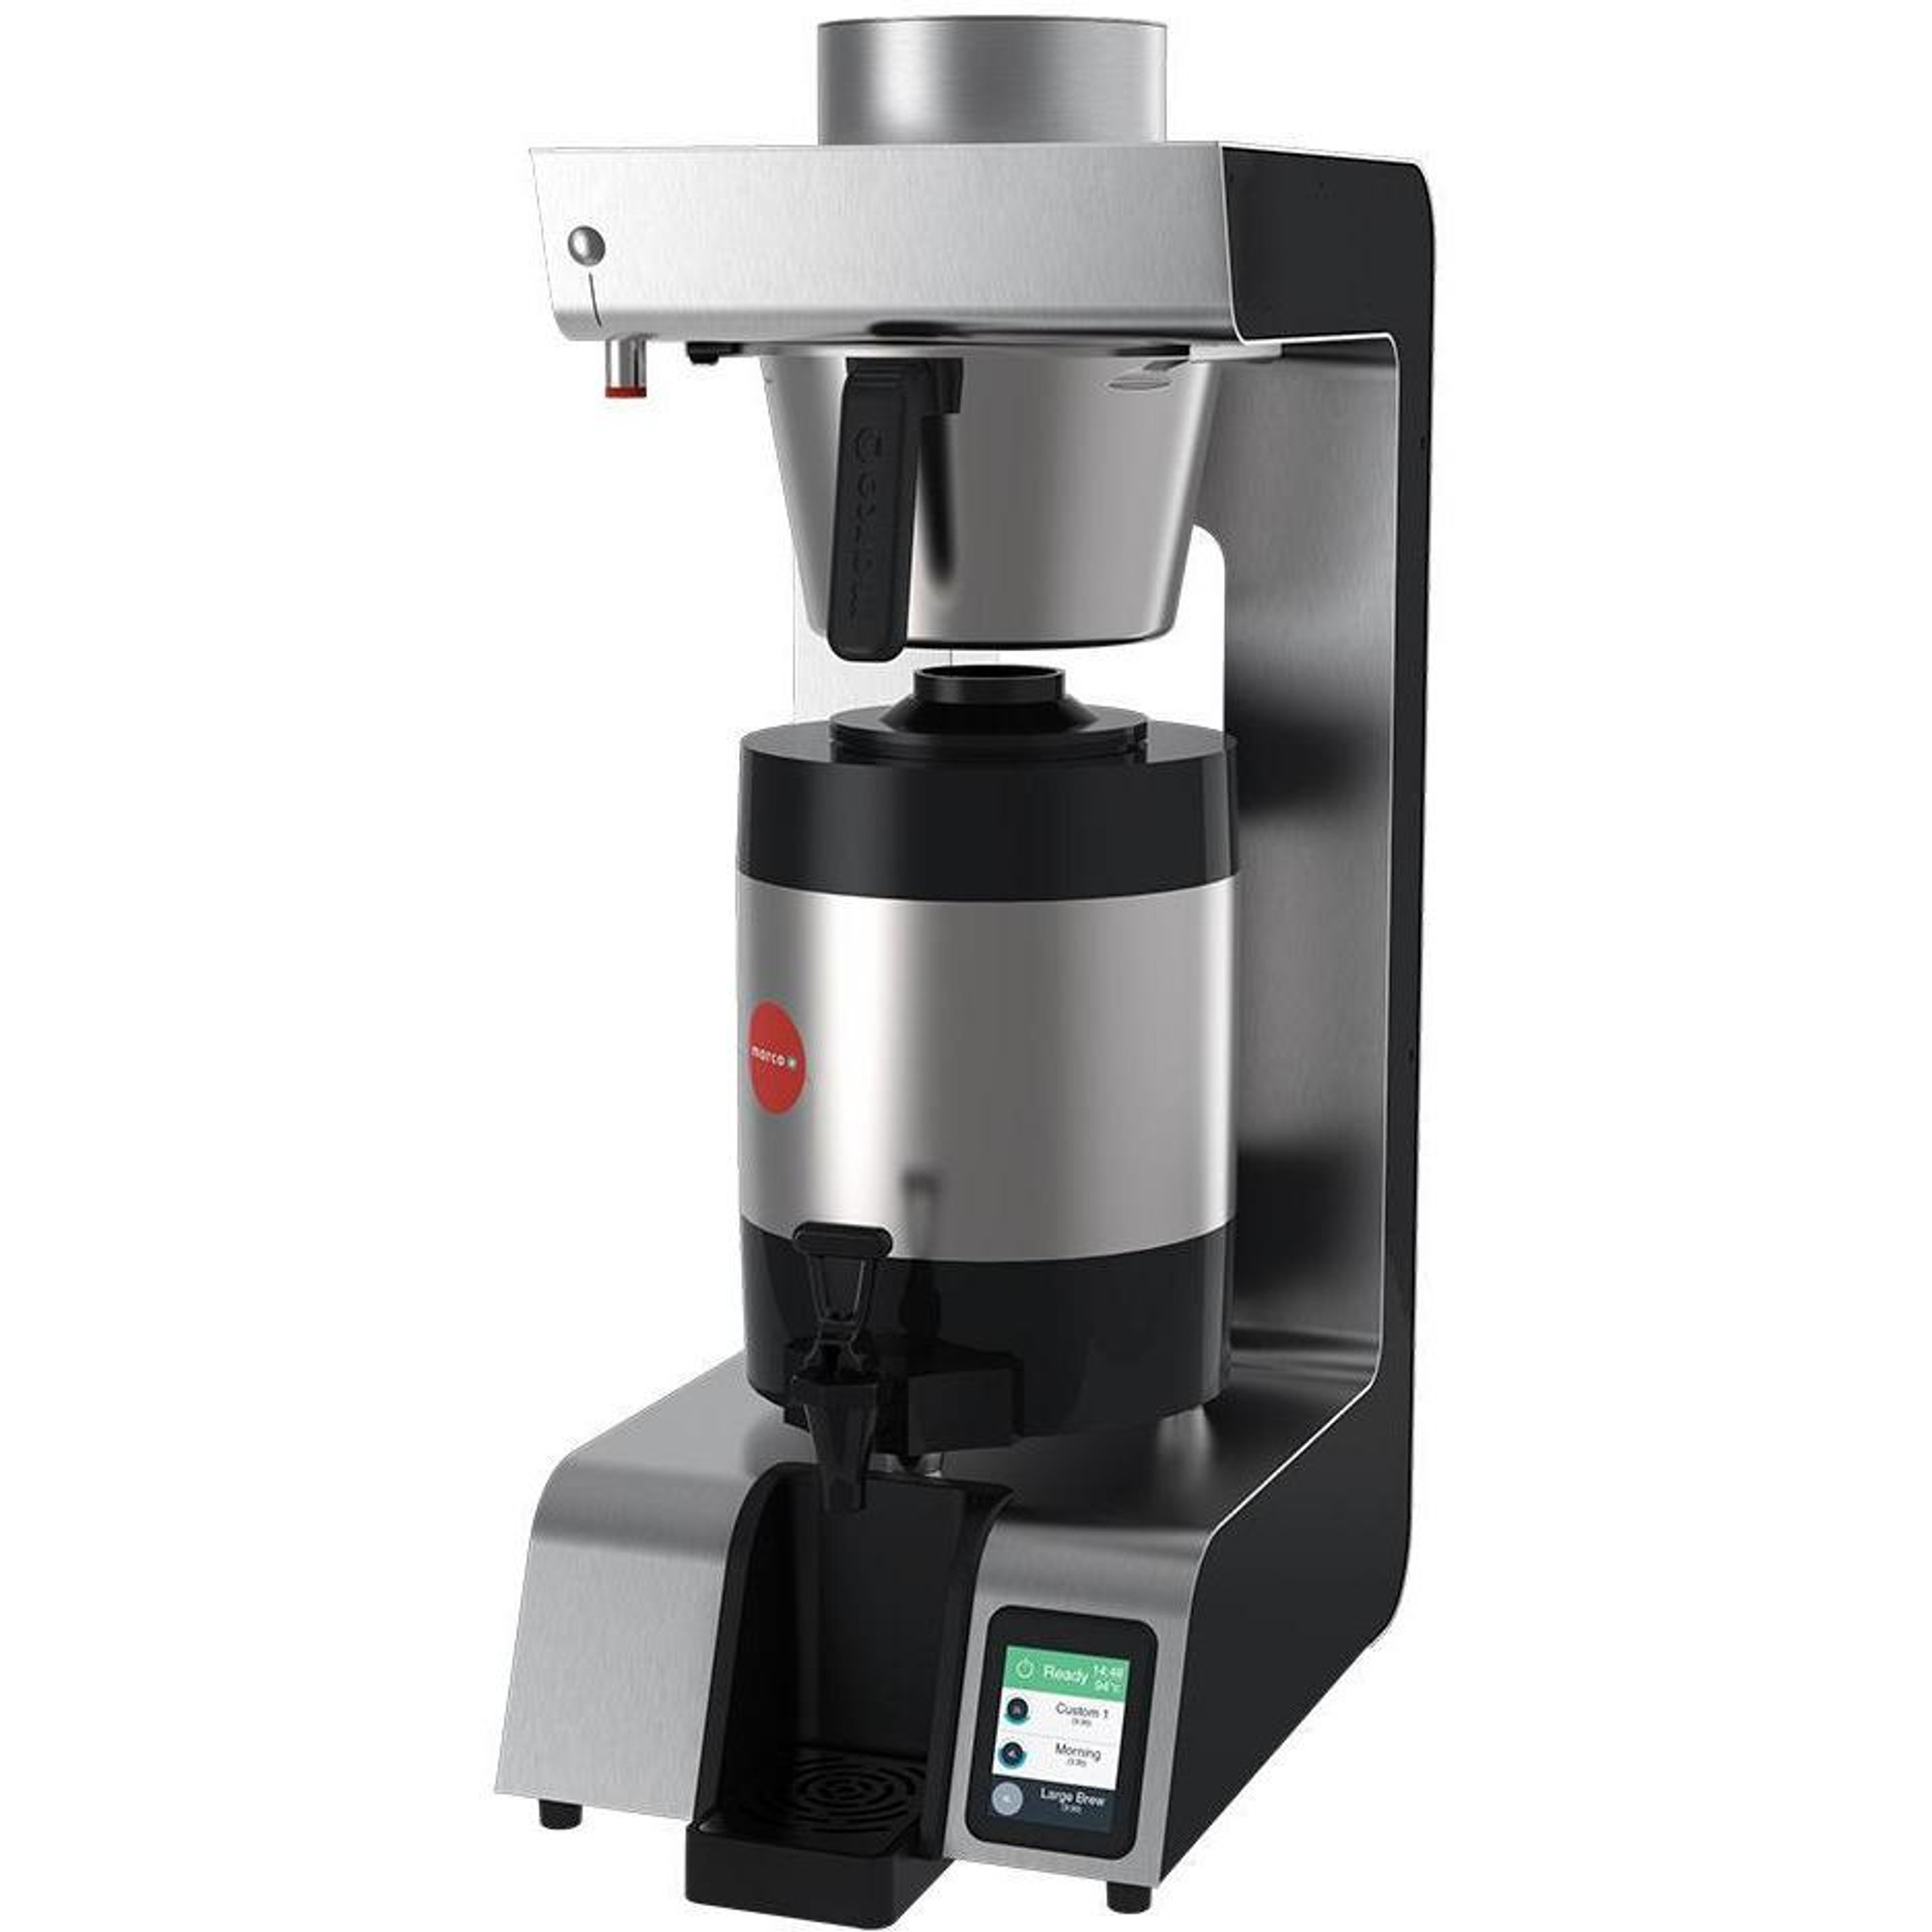 Marco Jet 5.6 Filter Coffee Brewer